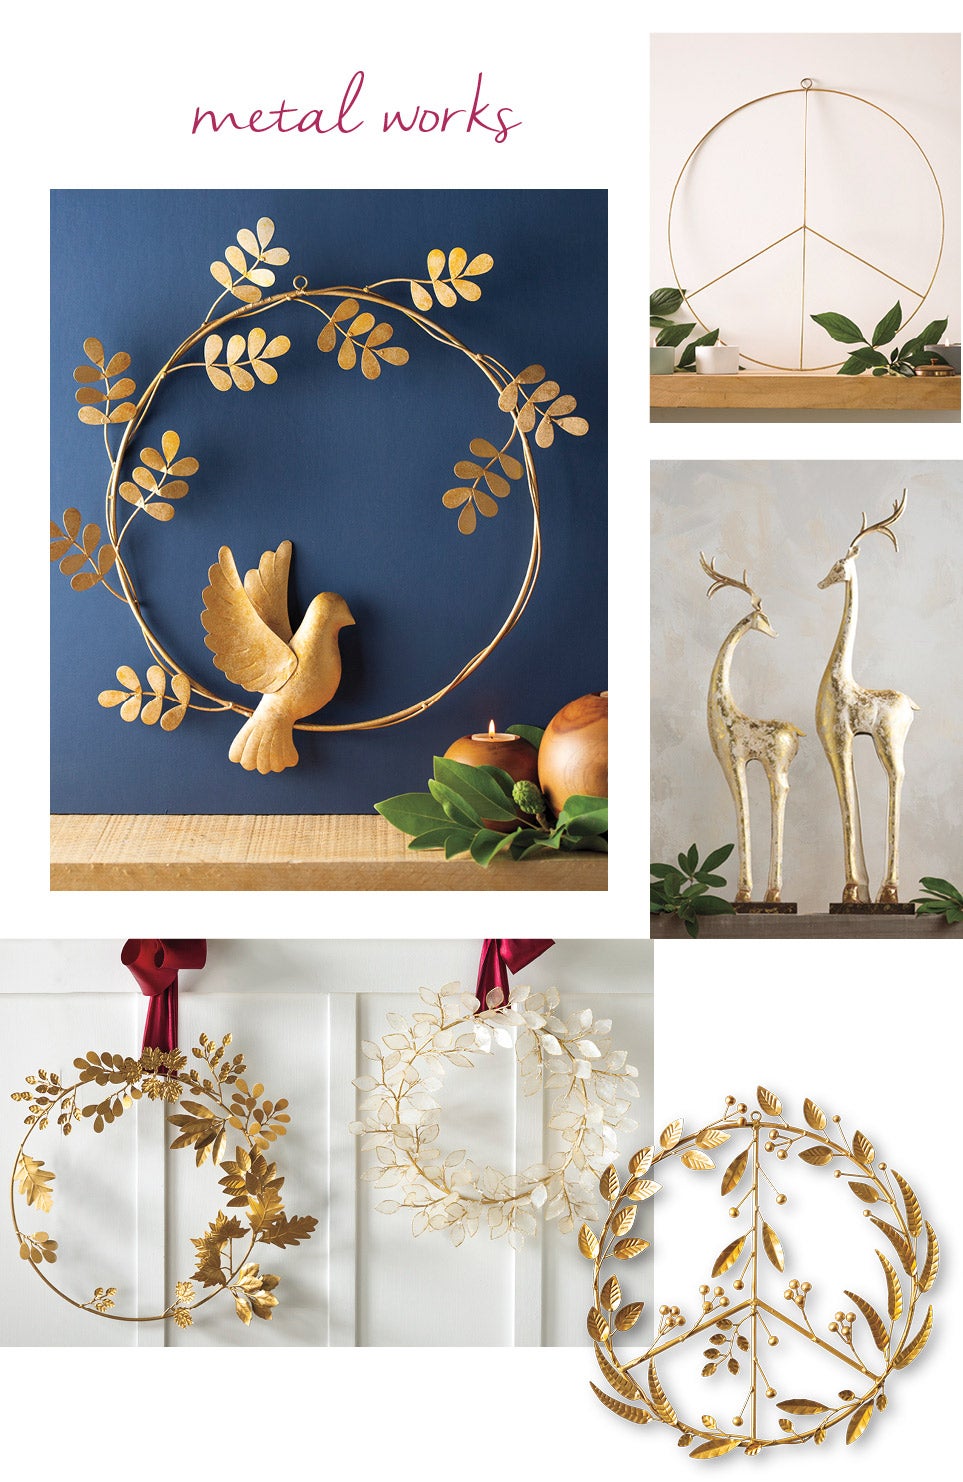 metal works - image of assorted metal holiday decorations